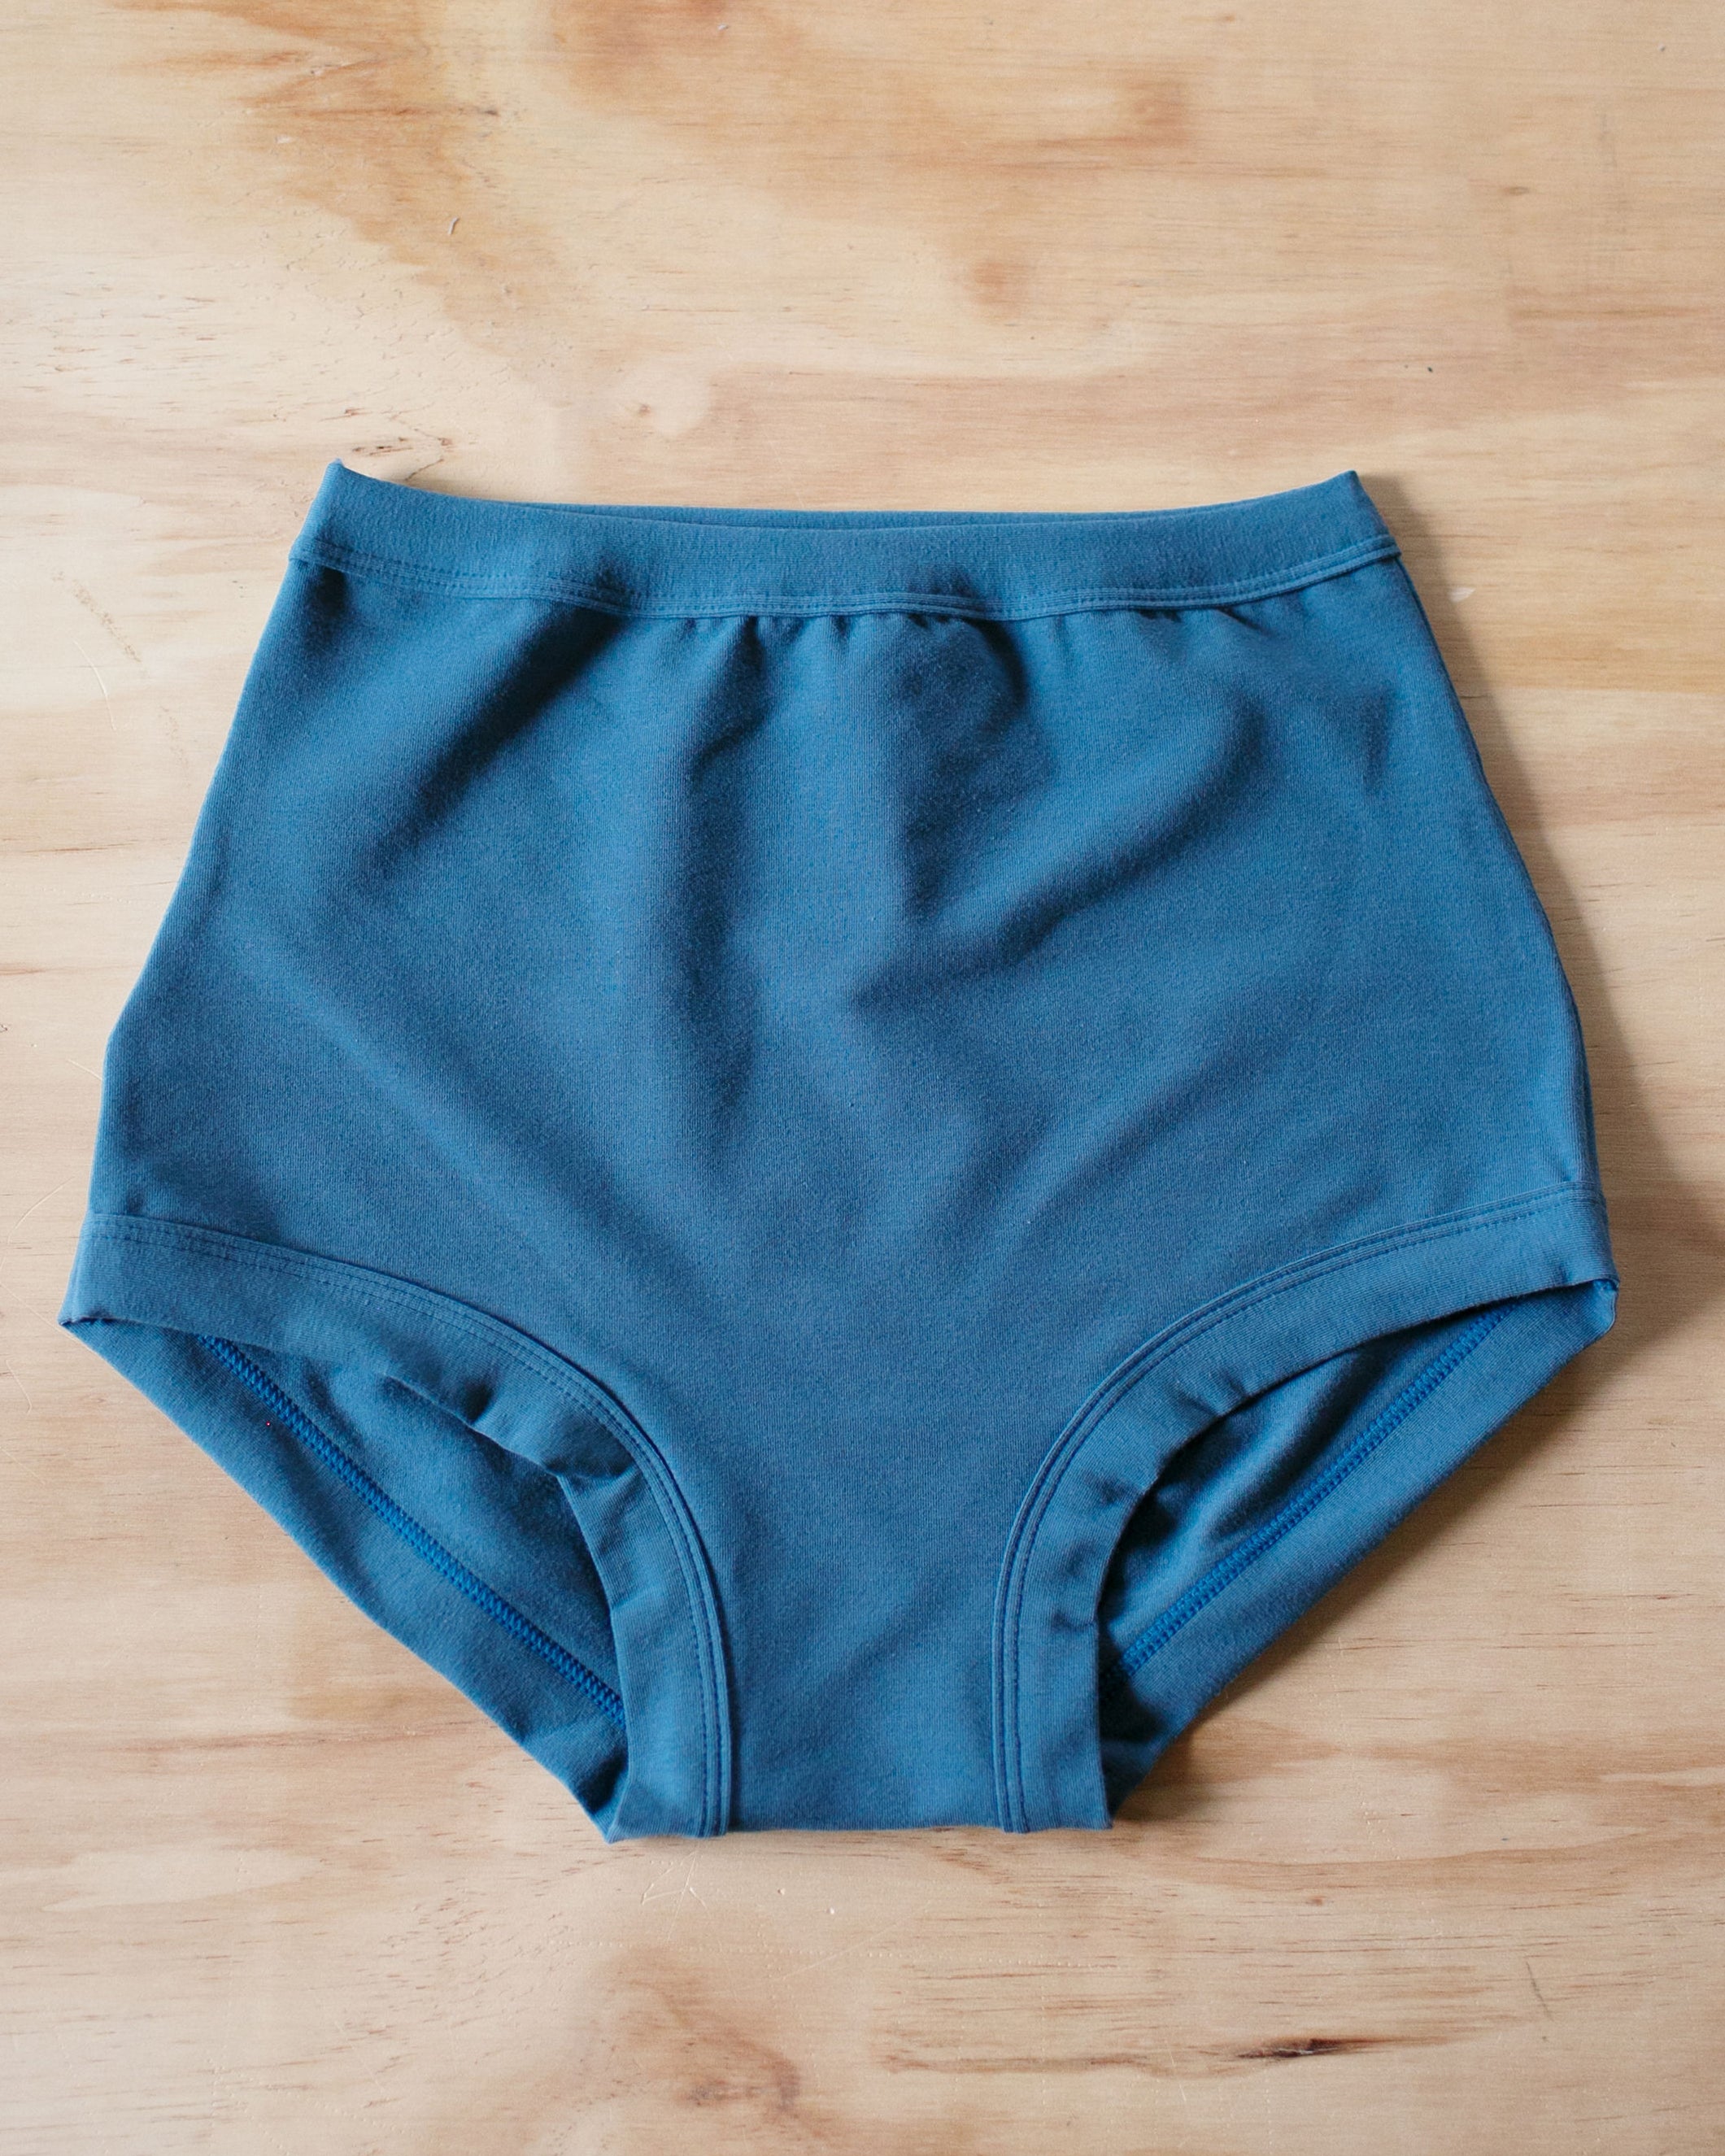 Flat lay of Thunderpants organic cotton Sky Rise style underwear in Stormy Blue color.